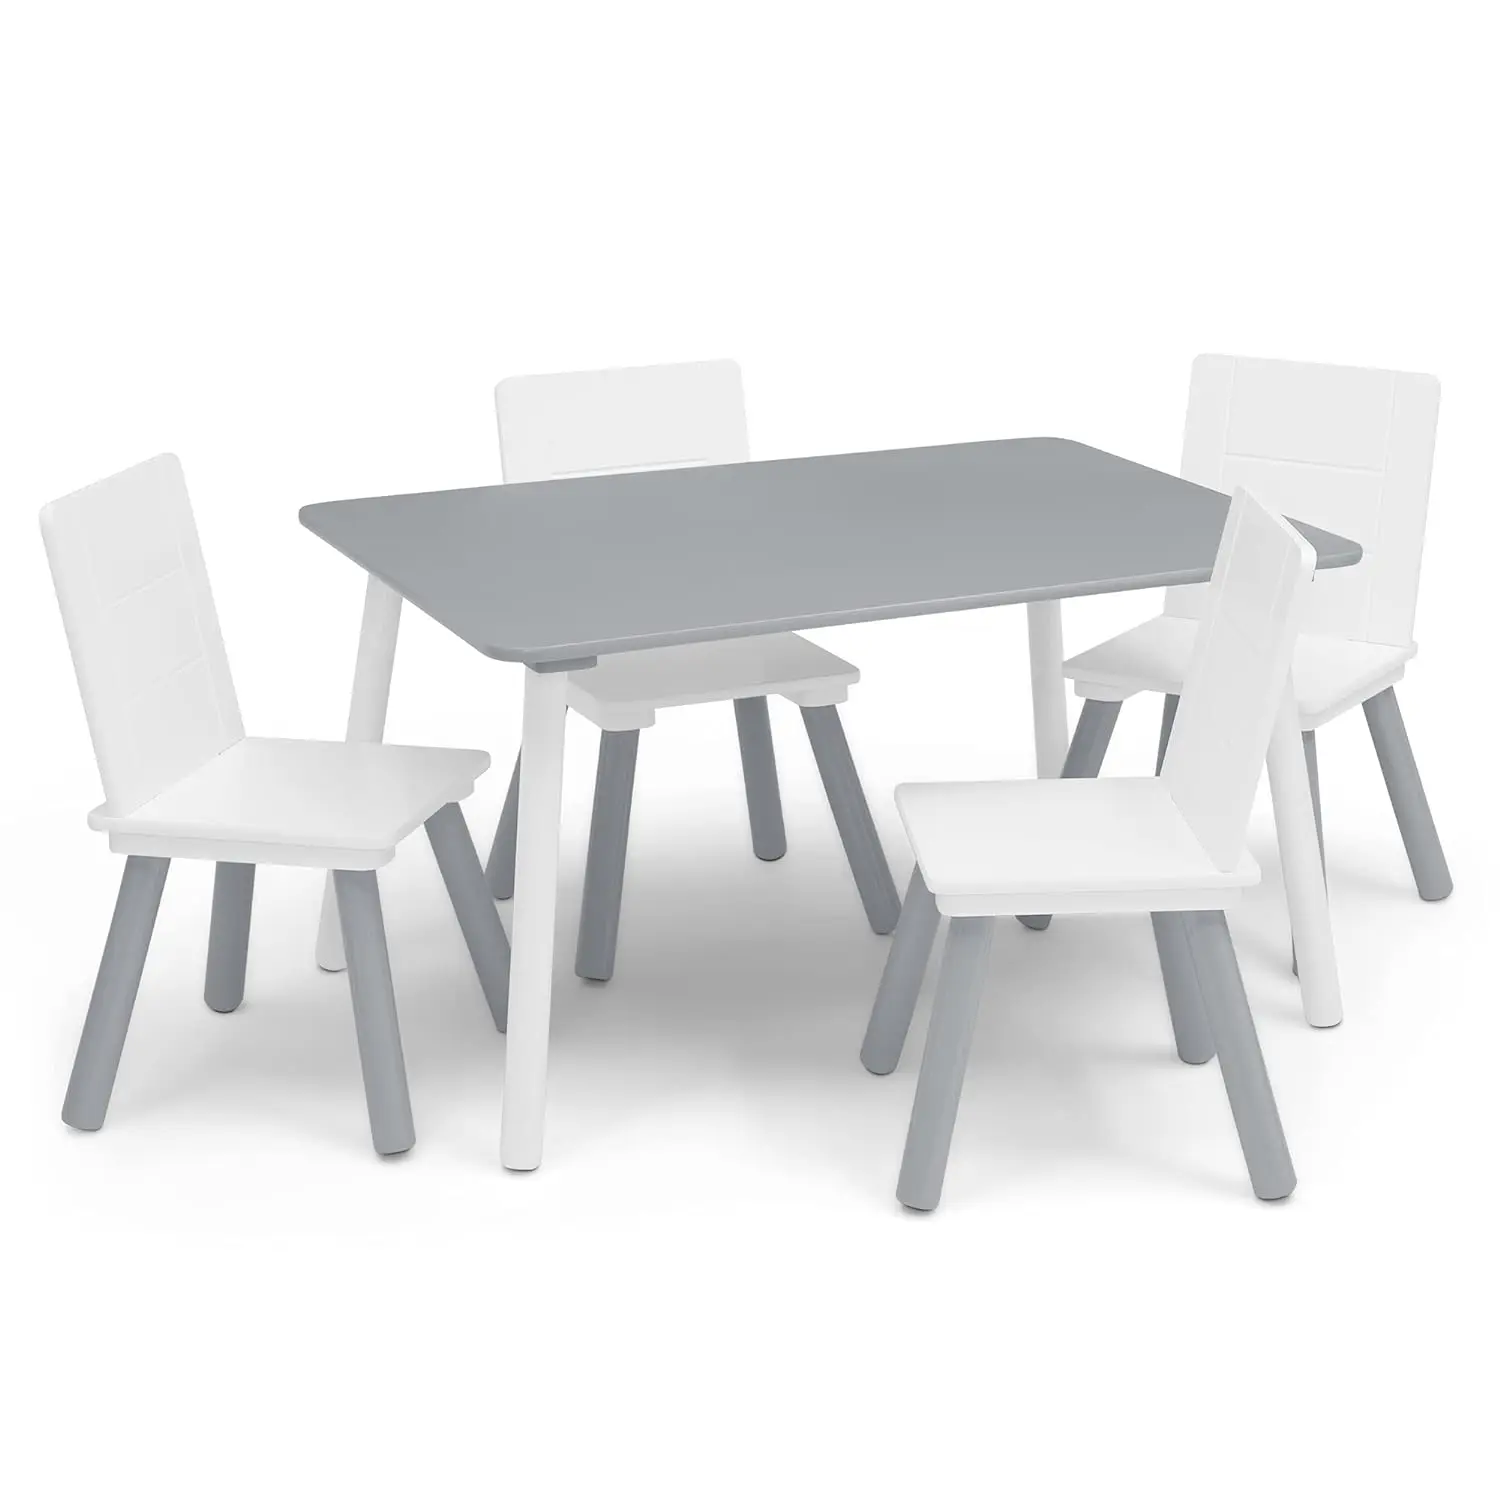 Delta Children Kids Table and Chair Set (4 Chairs Included) - Ideal for ... - $244.10